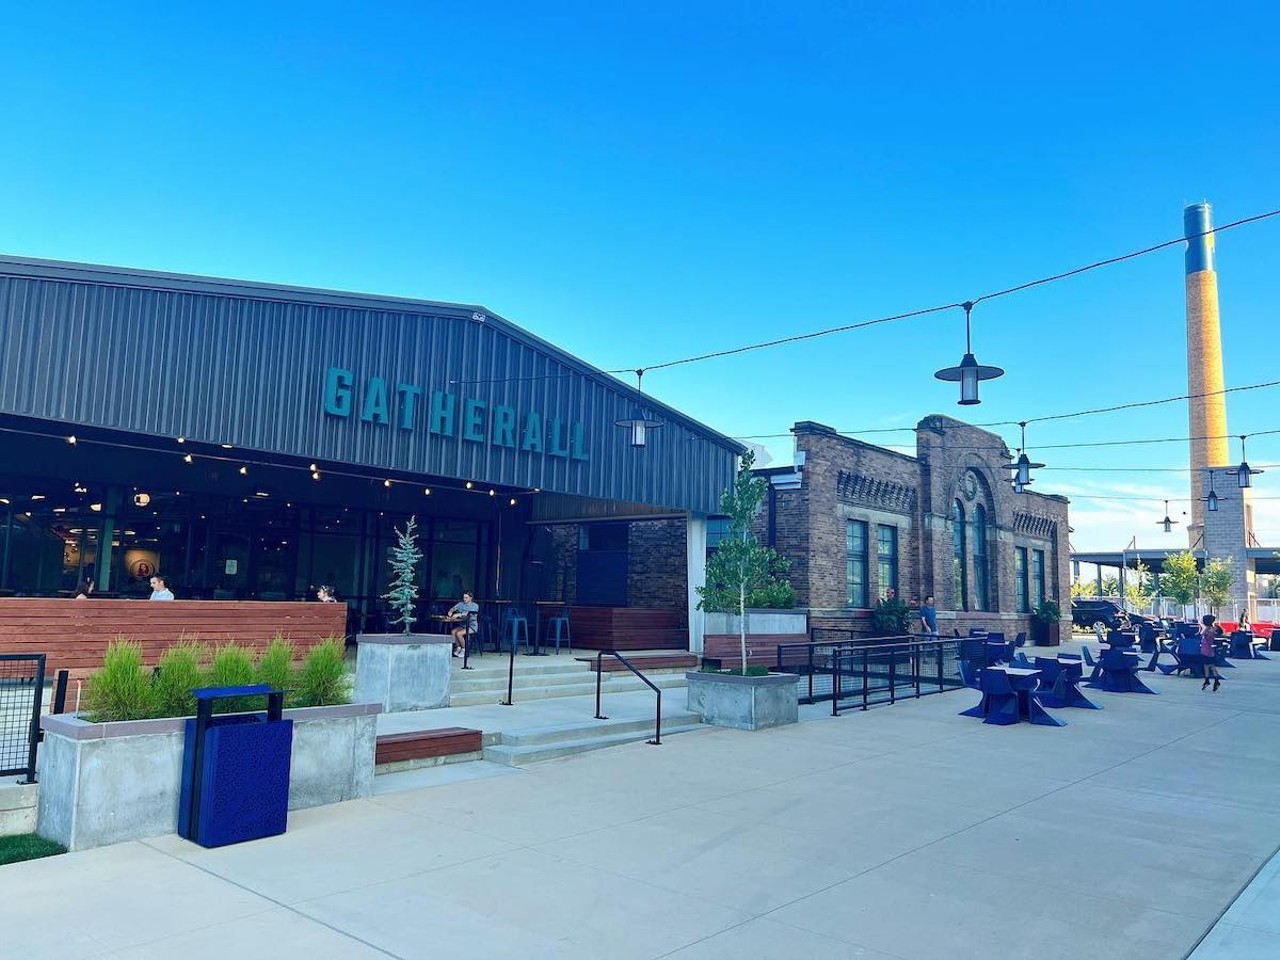 The Gatherall at Factory 52
2750 Park Ave., Norwood
Factory 52’s The Gatherall will host its inaugural, single-day fish fry feast on Friday, Feb. 16 starting at 11 a.m. The food hall will have a variety of meatless dishes and fish options available.